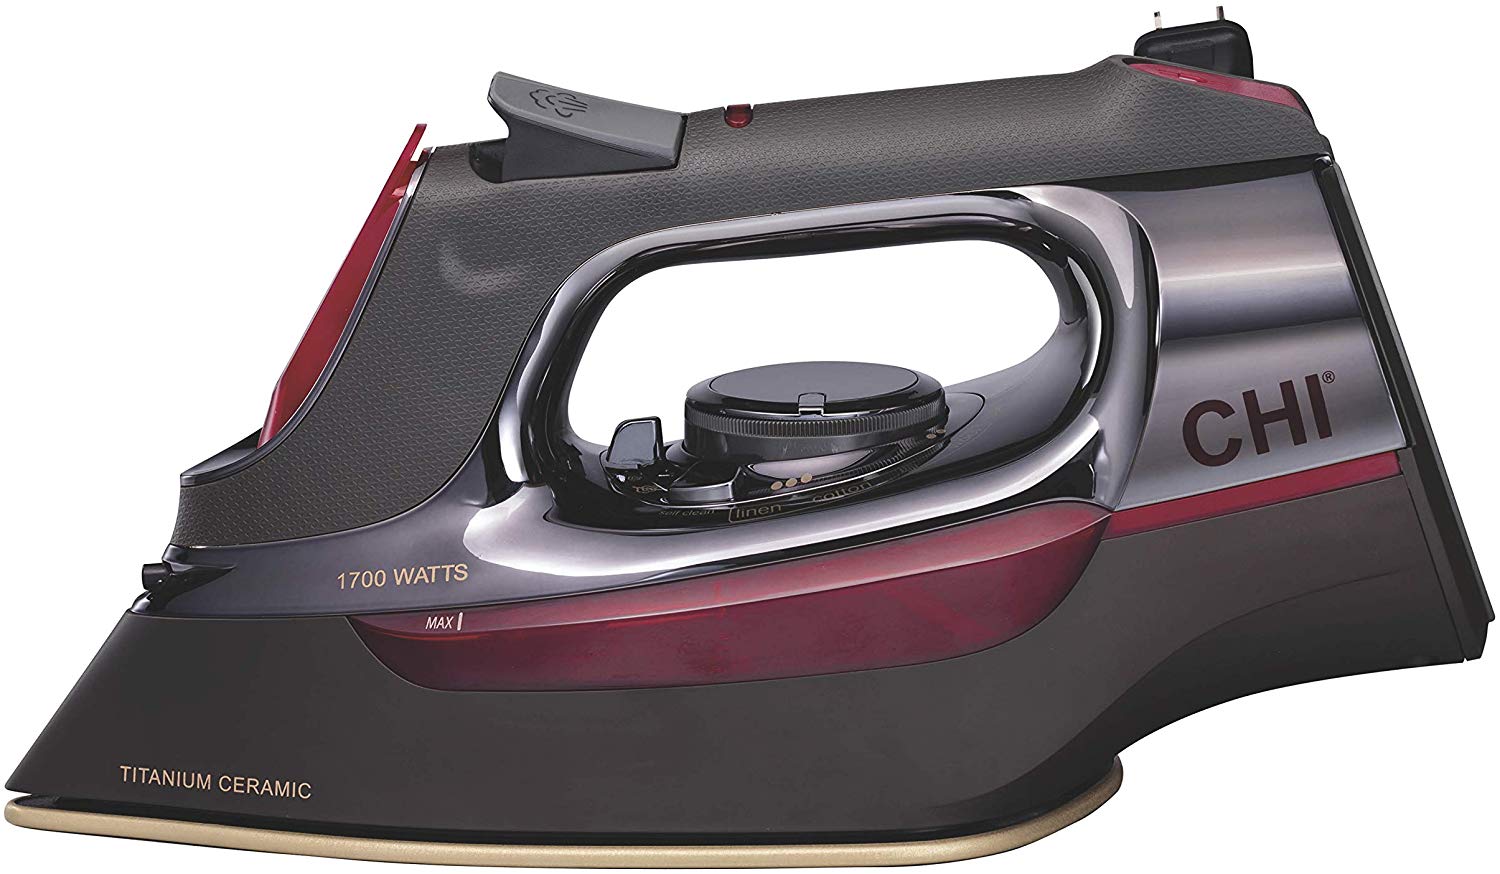 CHI Steam Iron with Retractable Cord, Titanium Infused Ceramic Soleplate & Over 400 Steam Holes, Professional-Grade, Gray (13109) Review